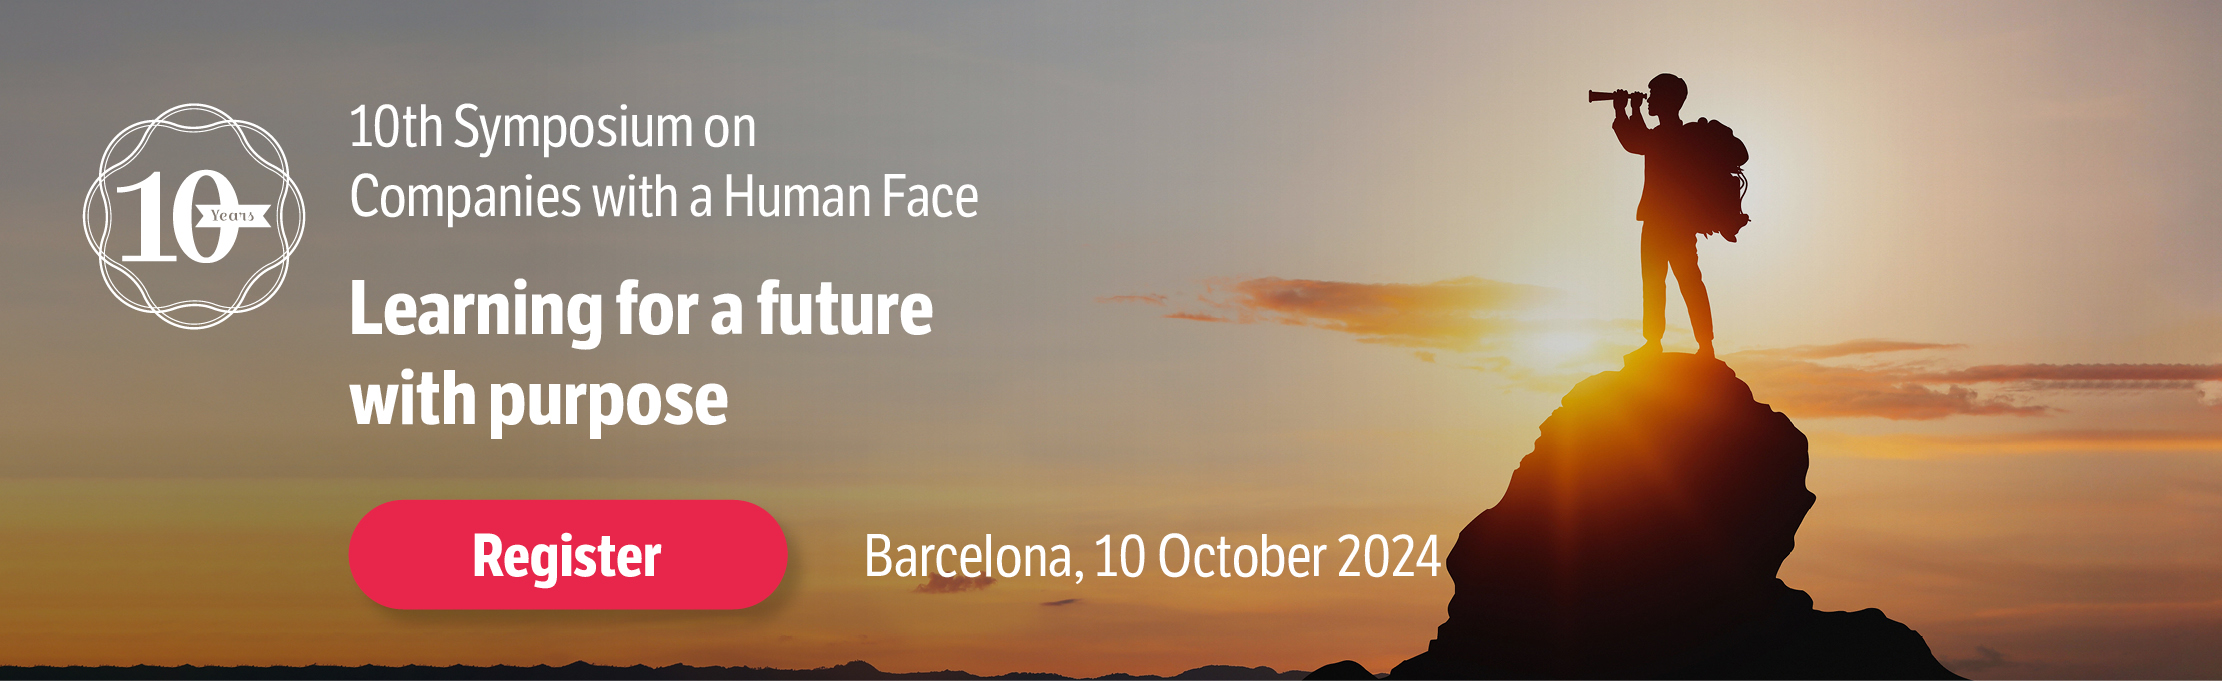 10th Symposium on Companies with a Human Face